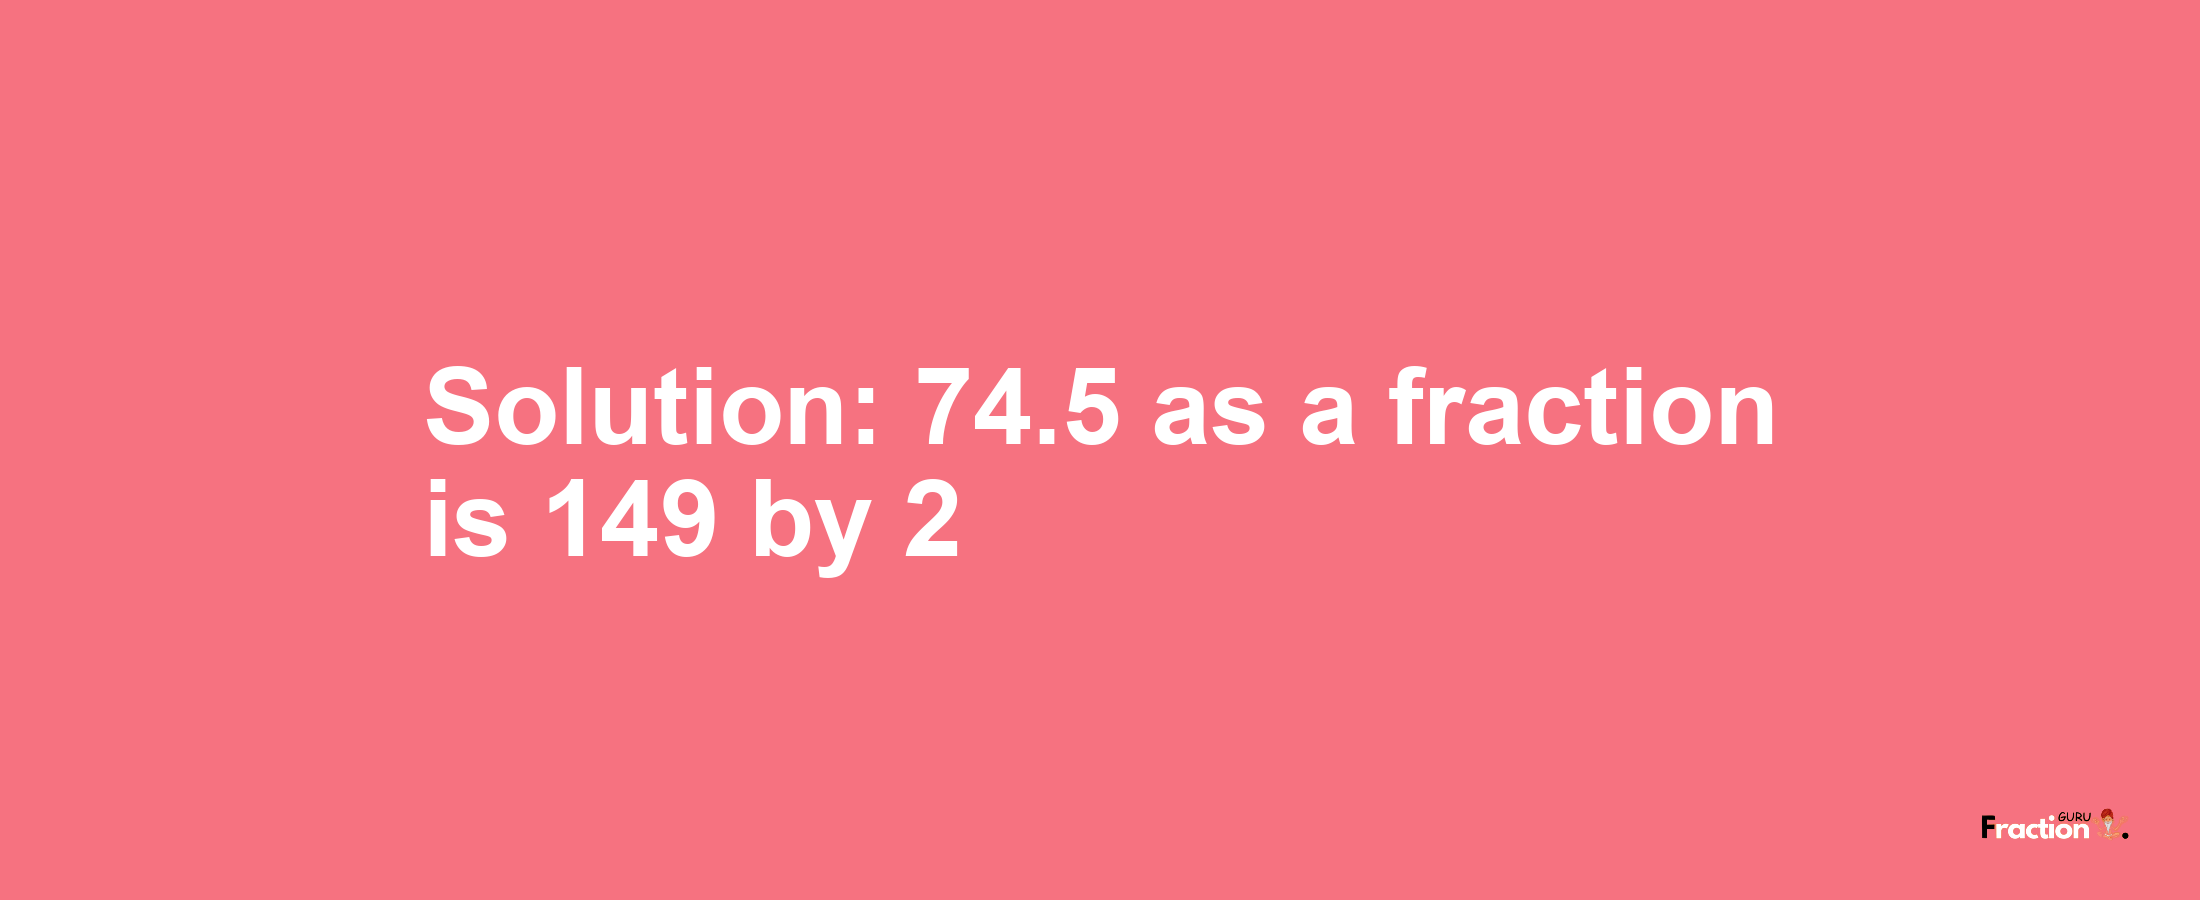 Solution:74.5 as a fraction is 149/2